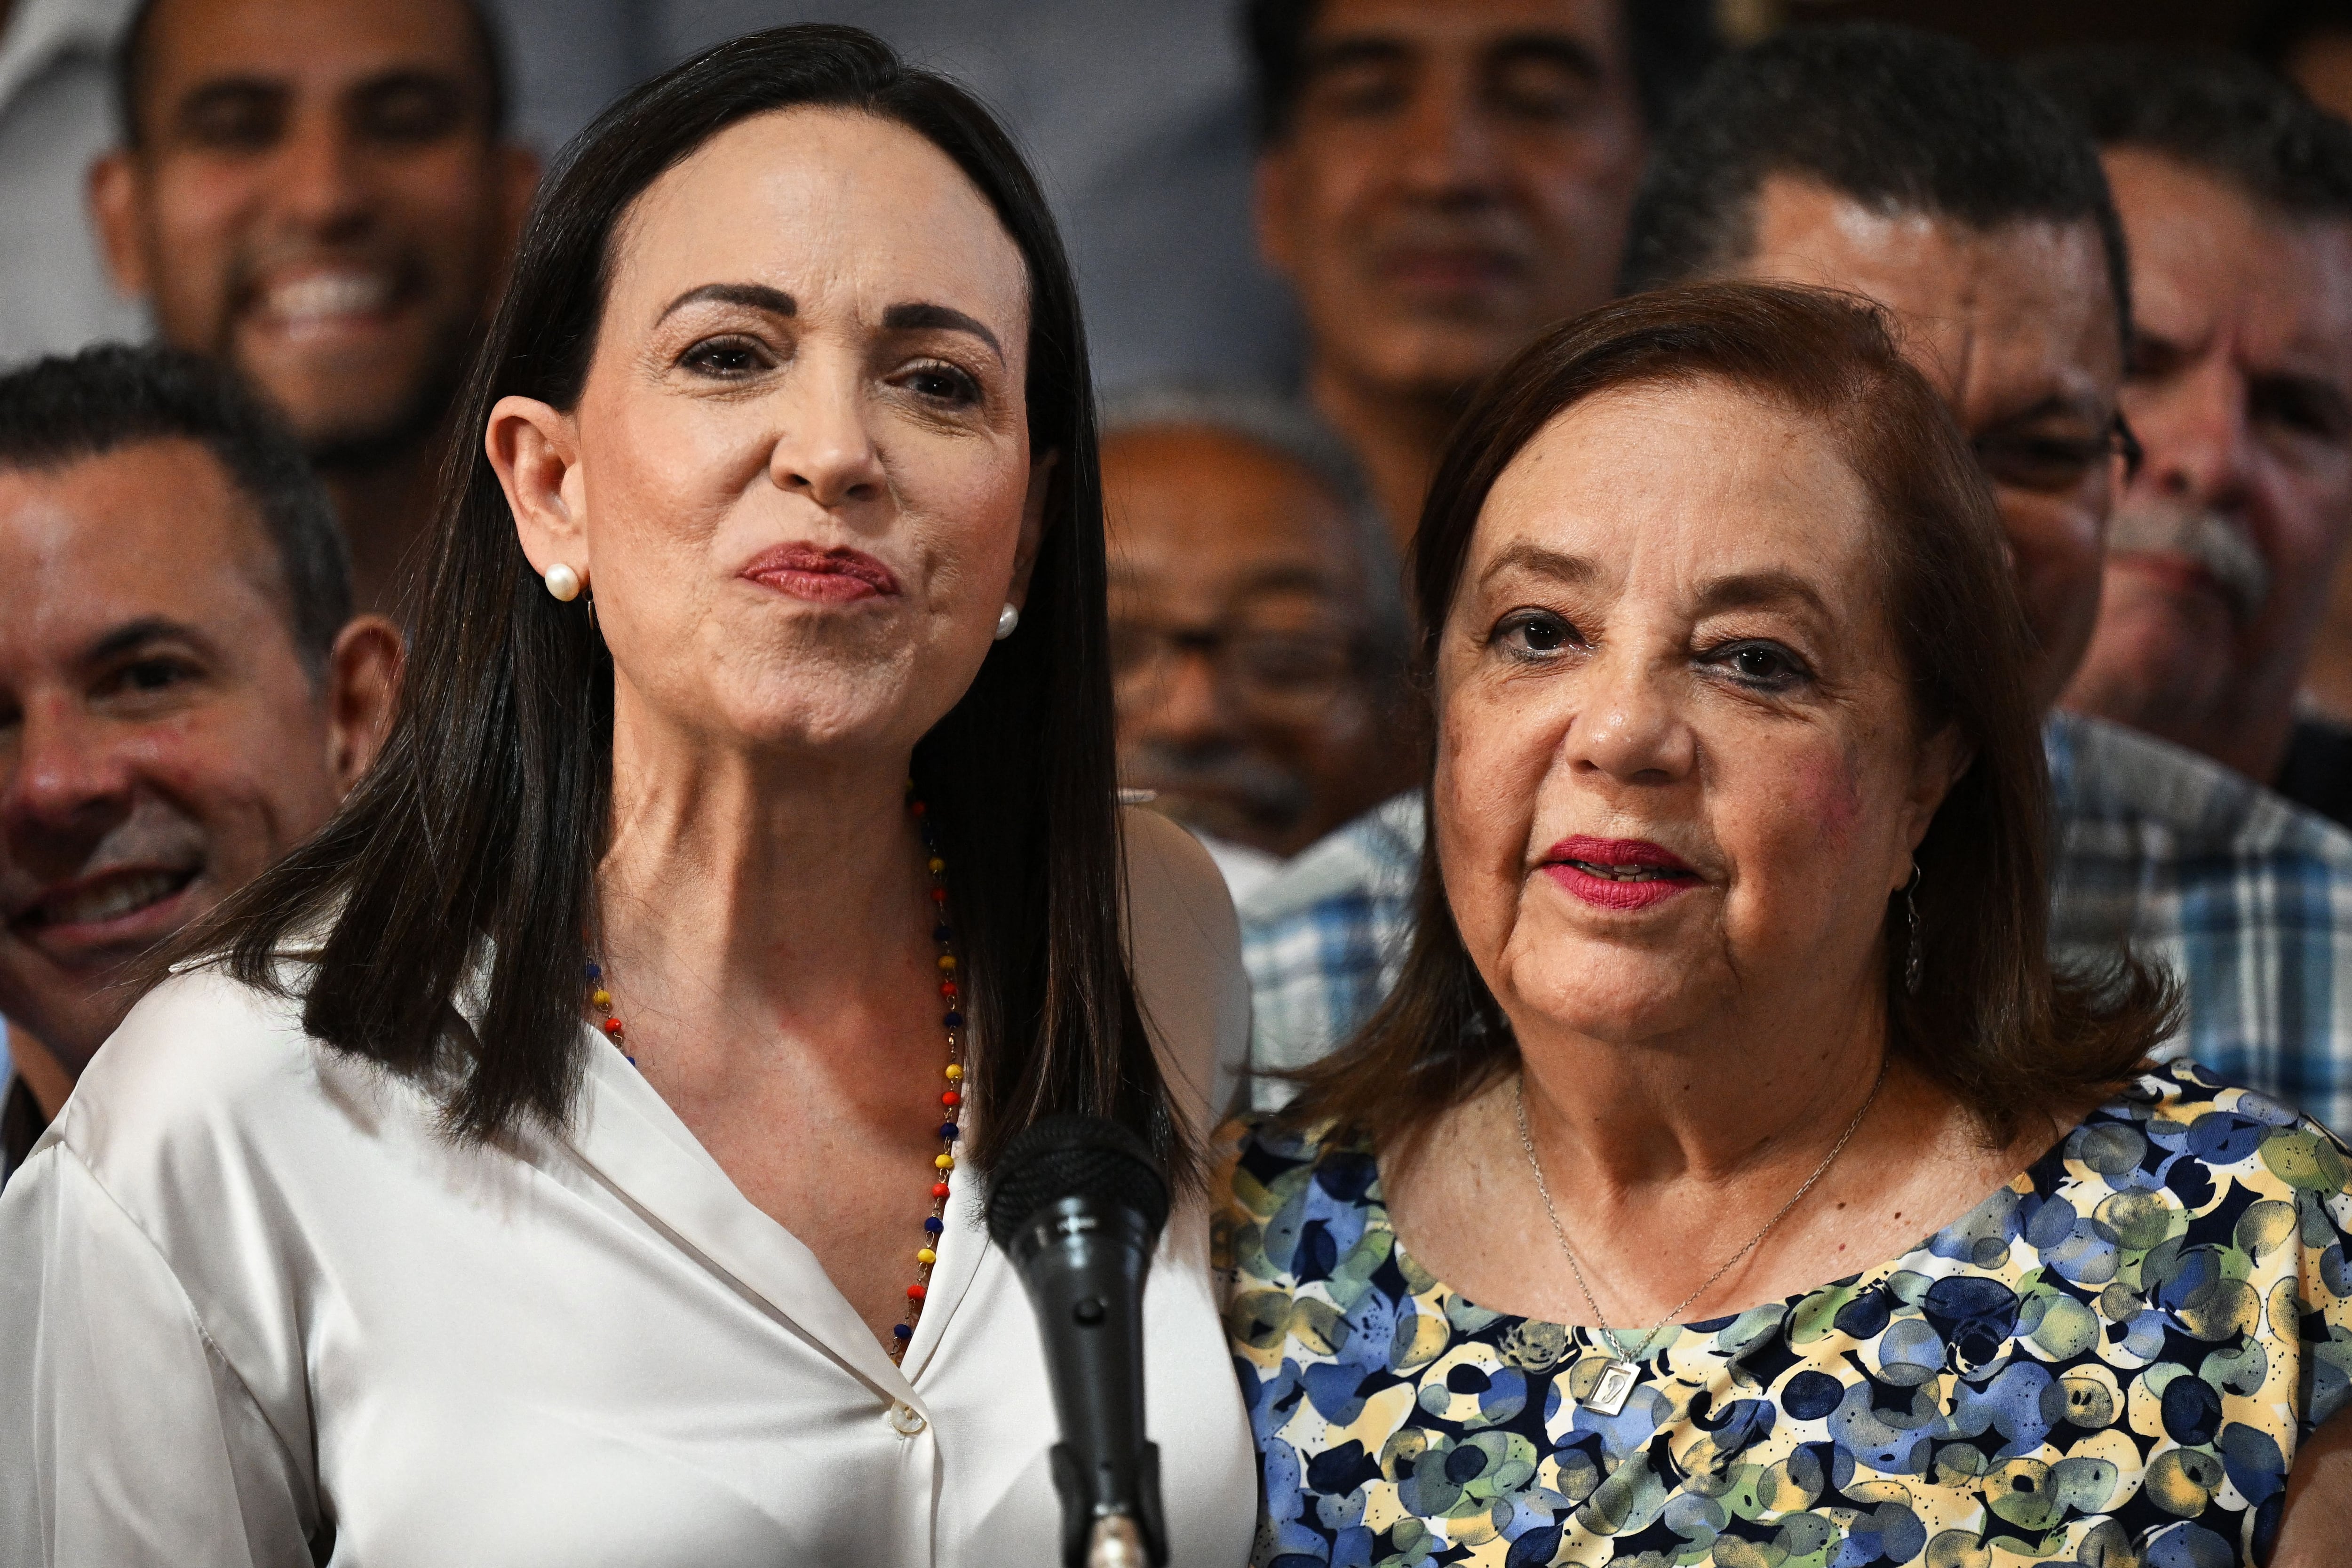 Venezuelan opposition leader María Corina Machado (left) gestures with her replacement in the upcoming presidential elections, Corina Yoris.  (Photo by Federico Parra/AFP).